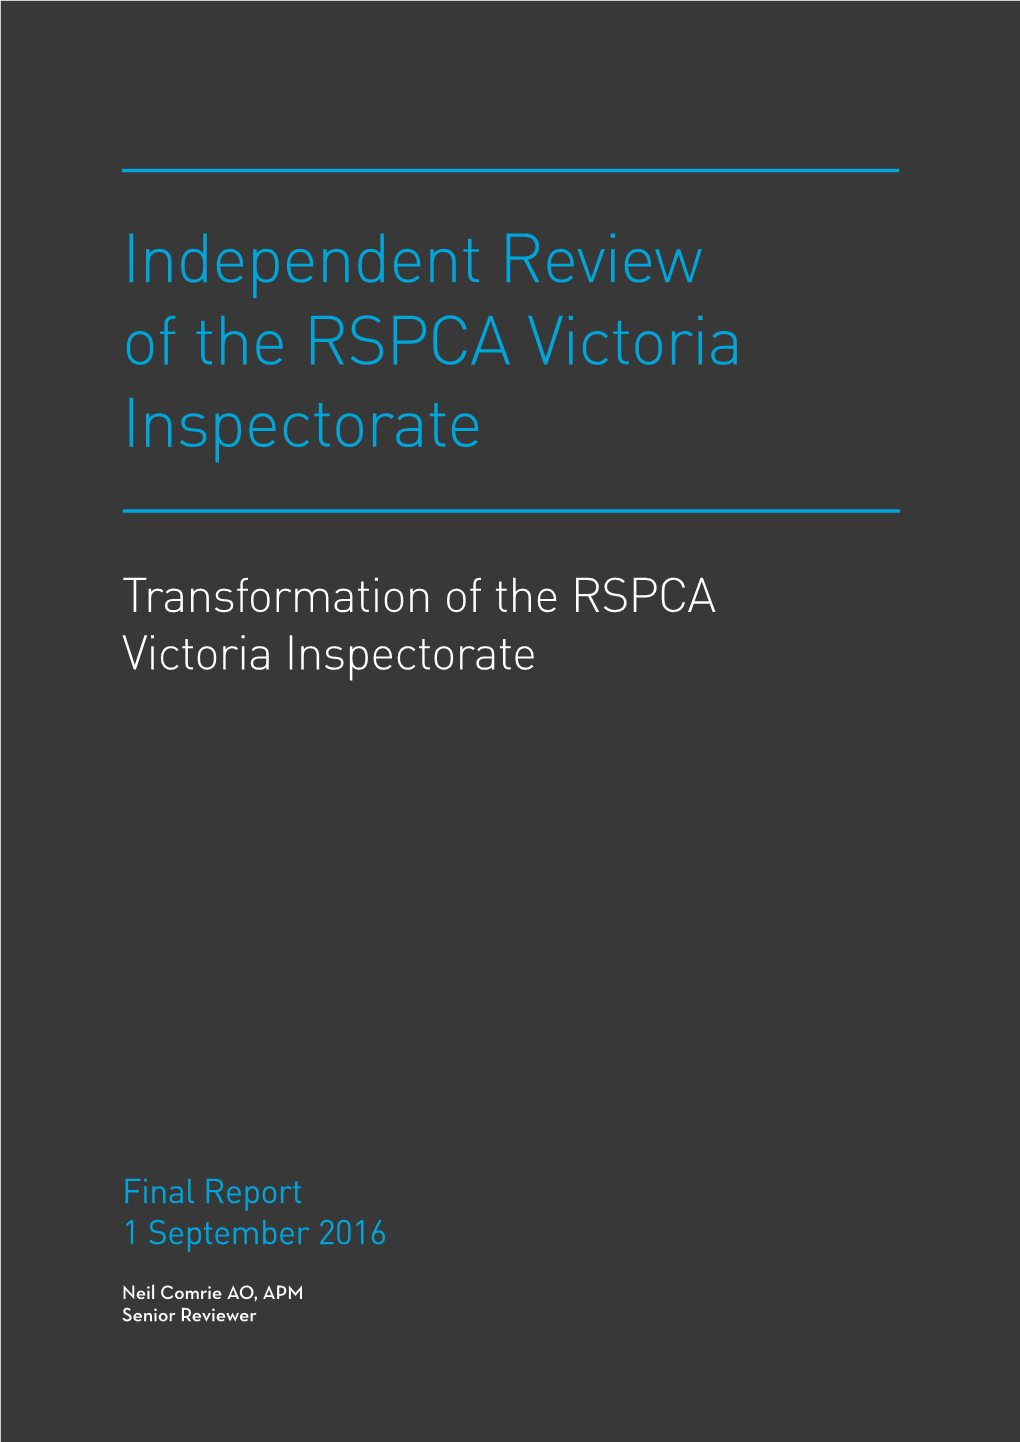 Independent Review of the RSPCA Victoria Inspectorate